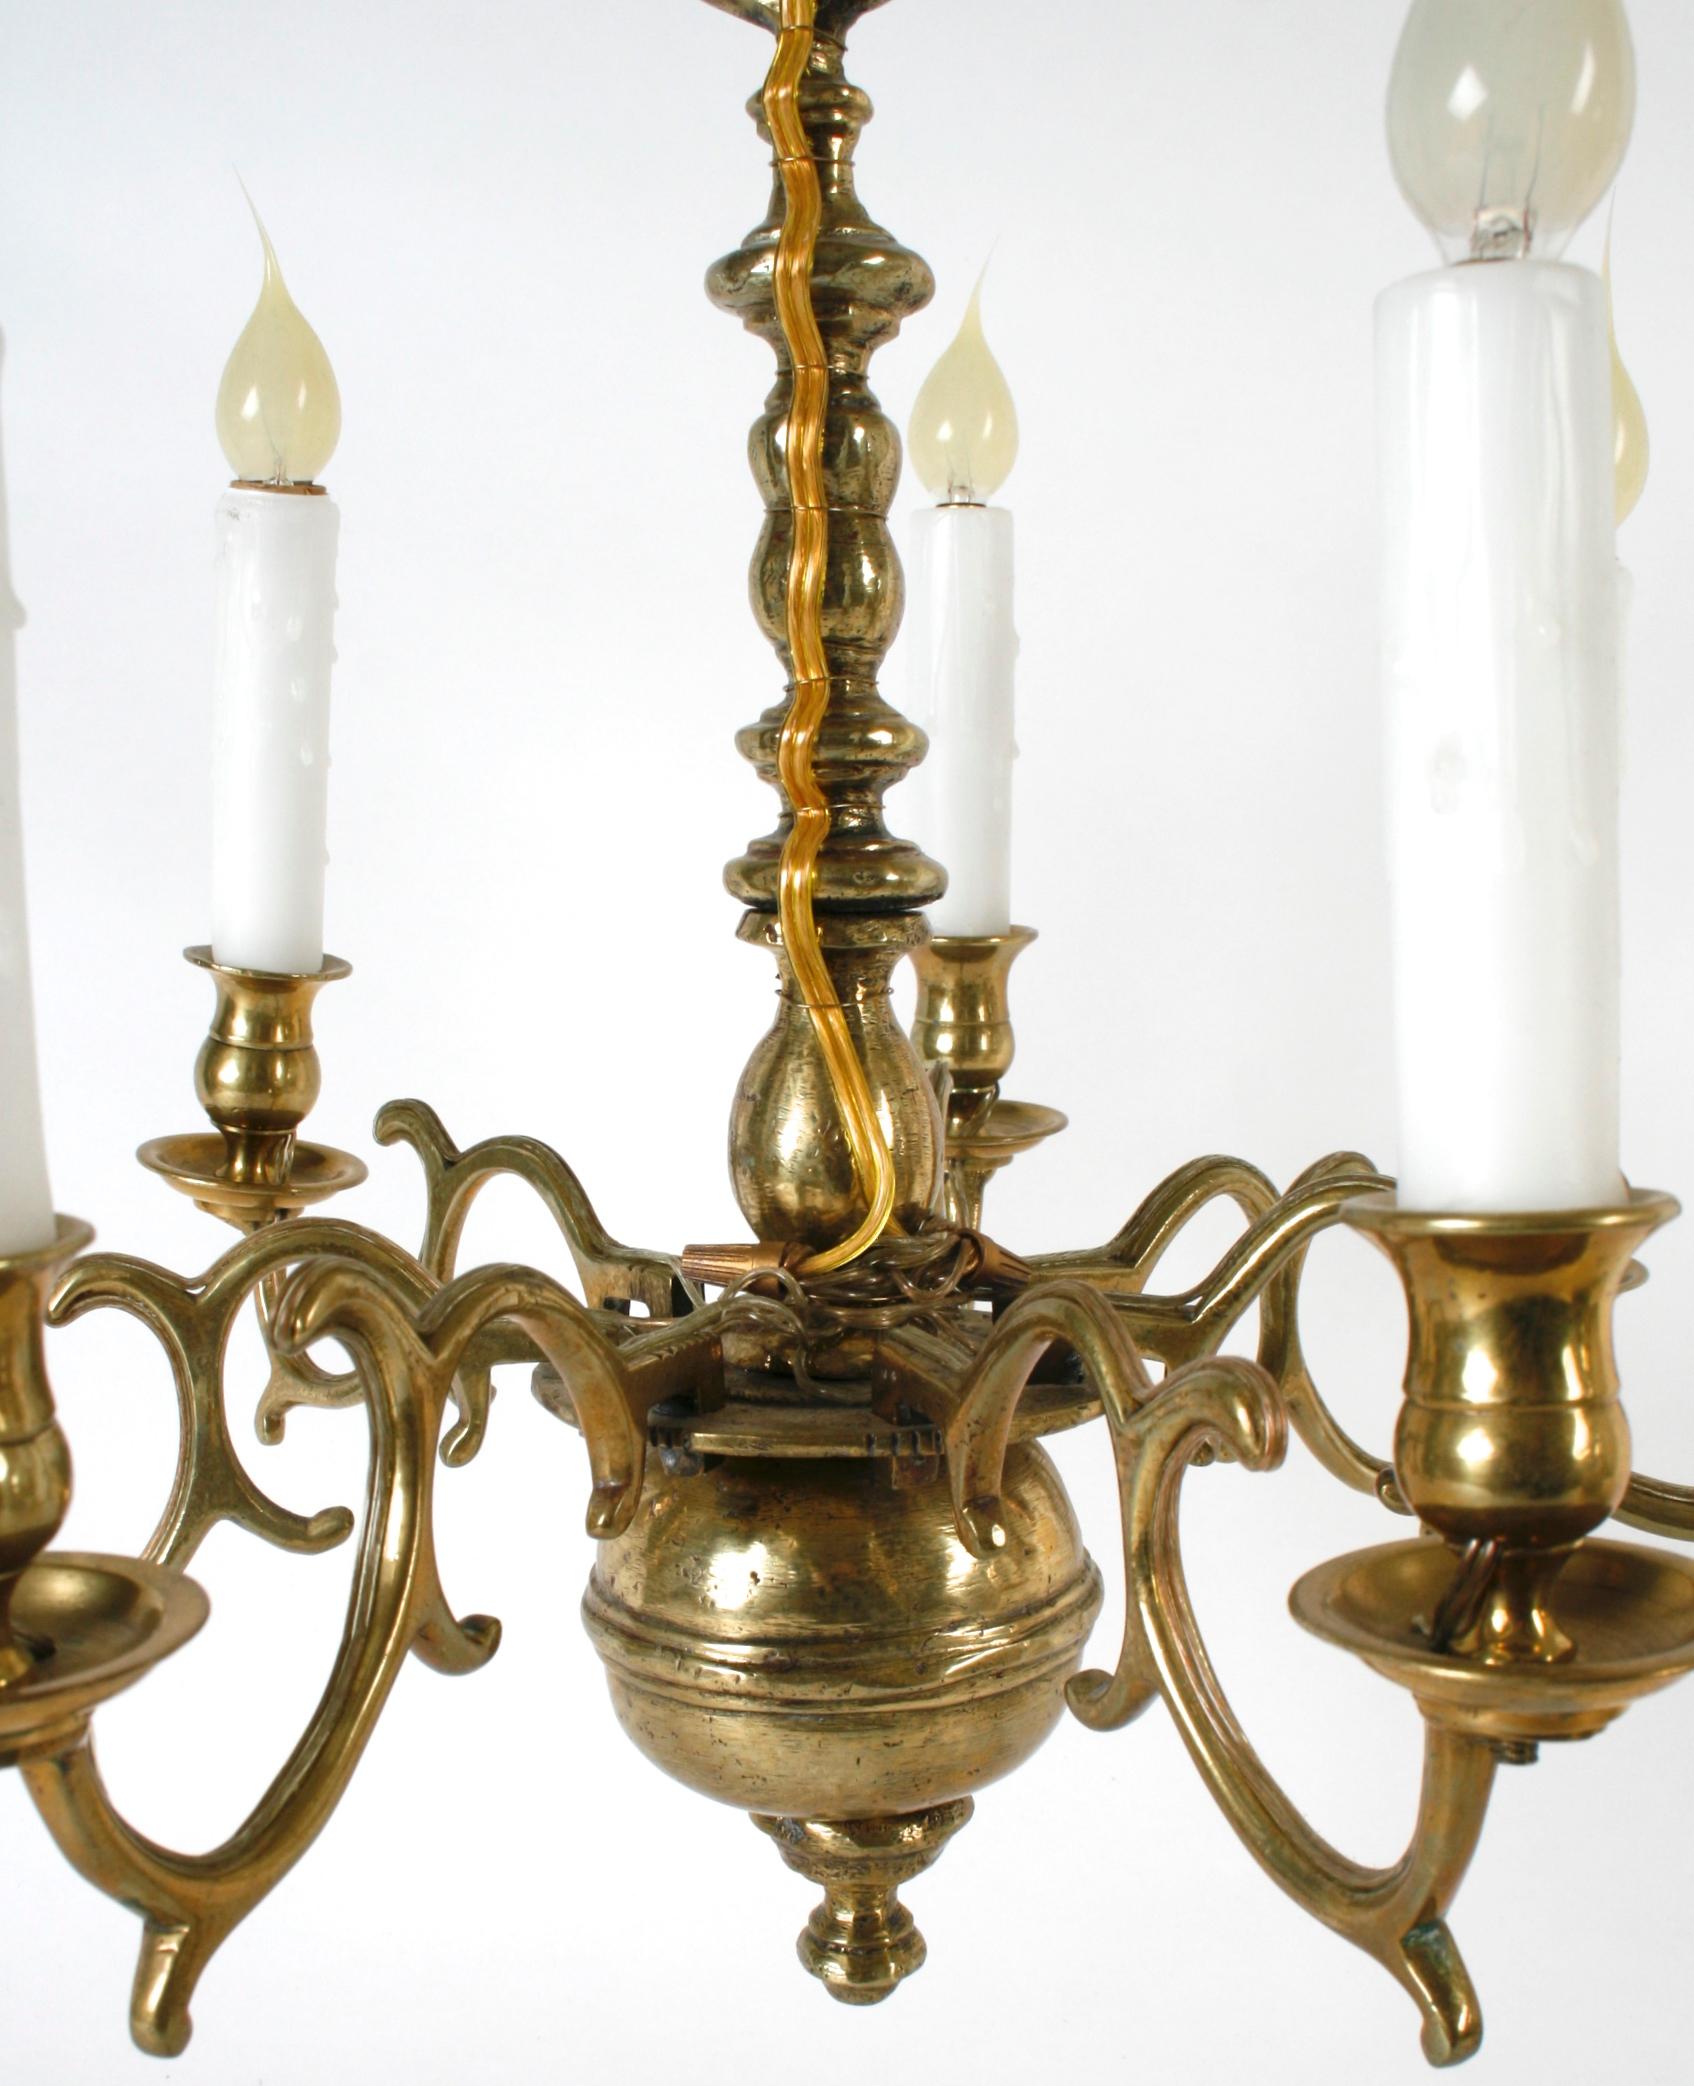 Dutch colonial 7-light brass chandelier with pegged, scrolled arms on bulbous turned shaft. This has a beautiful, mellow patina with great proportions. It has been surface wired to US standards and holds seven candelabra bulbs.